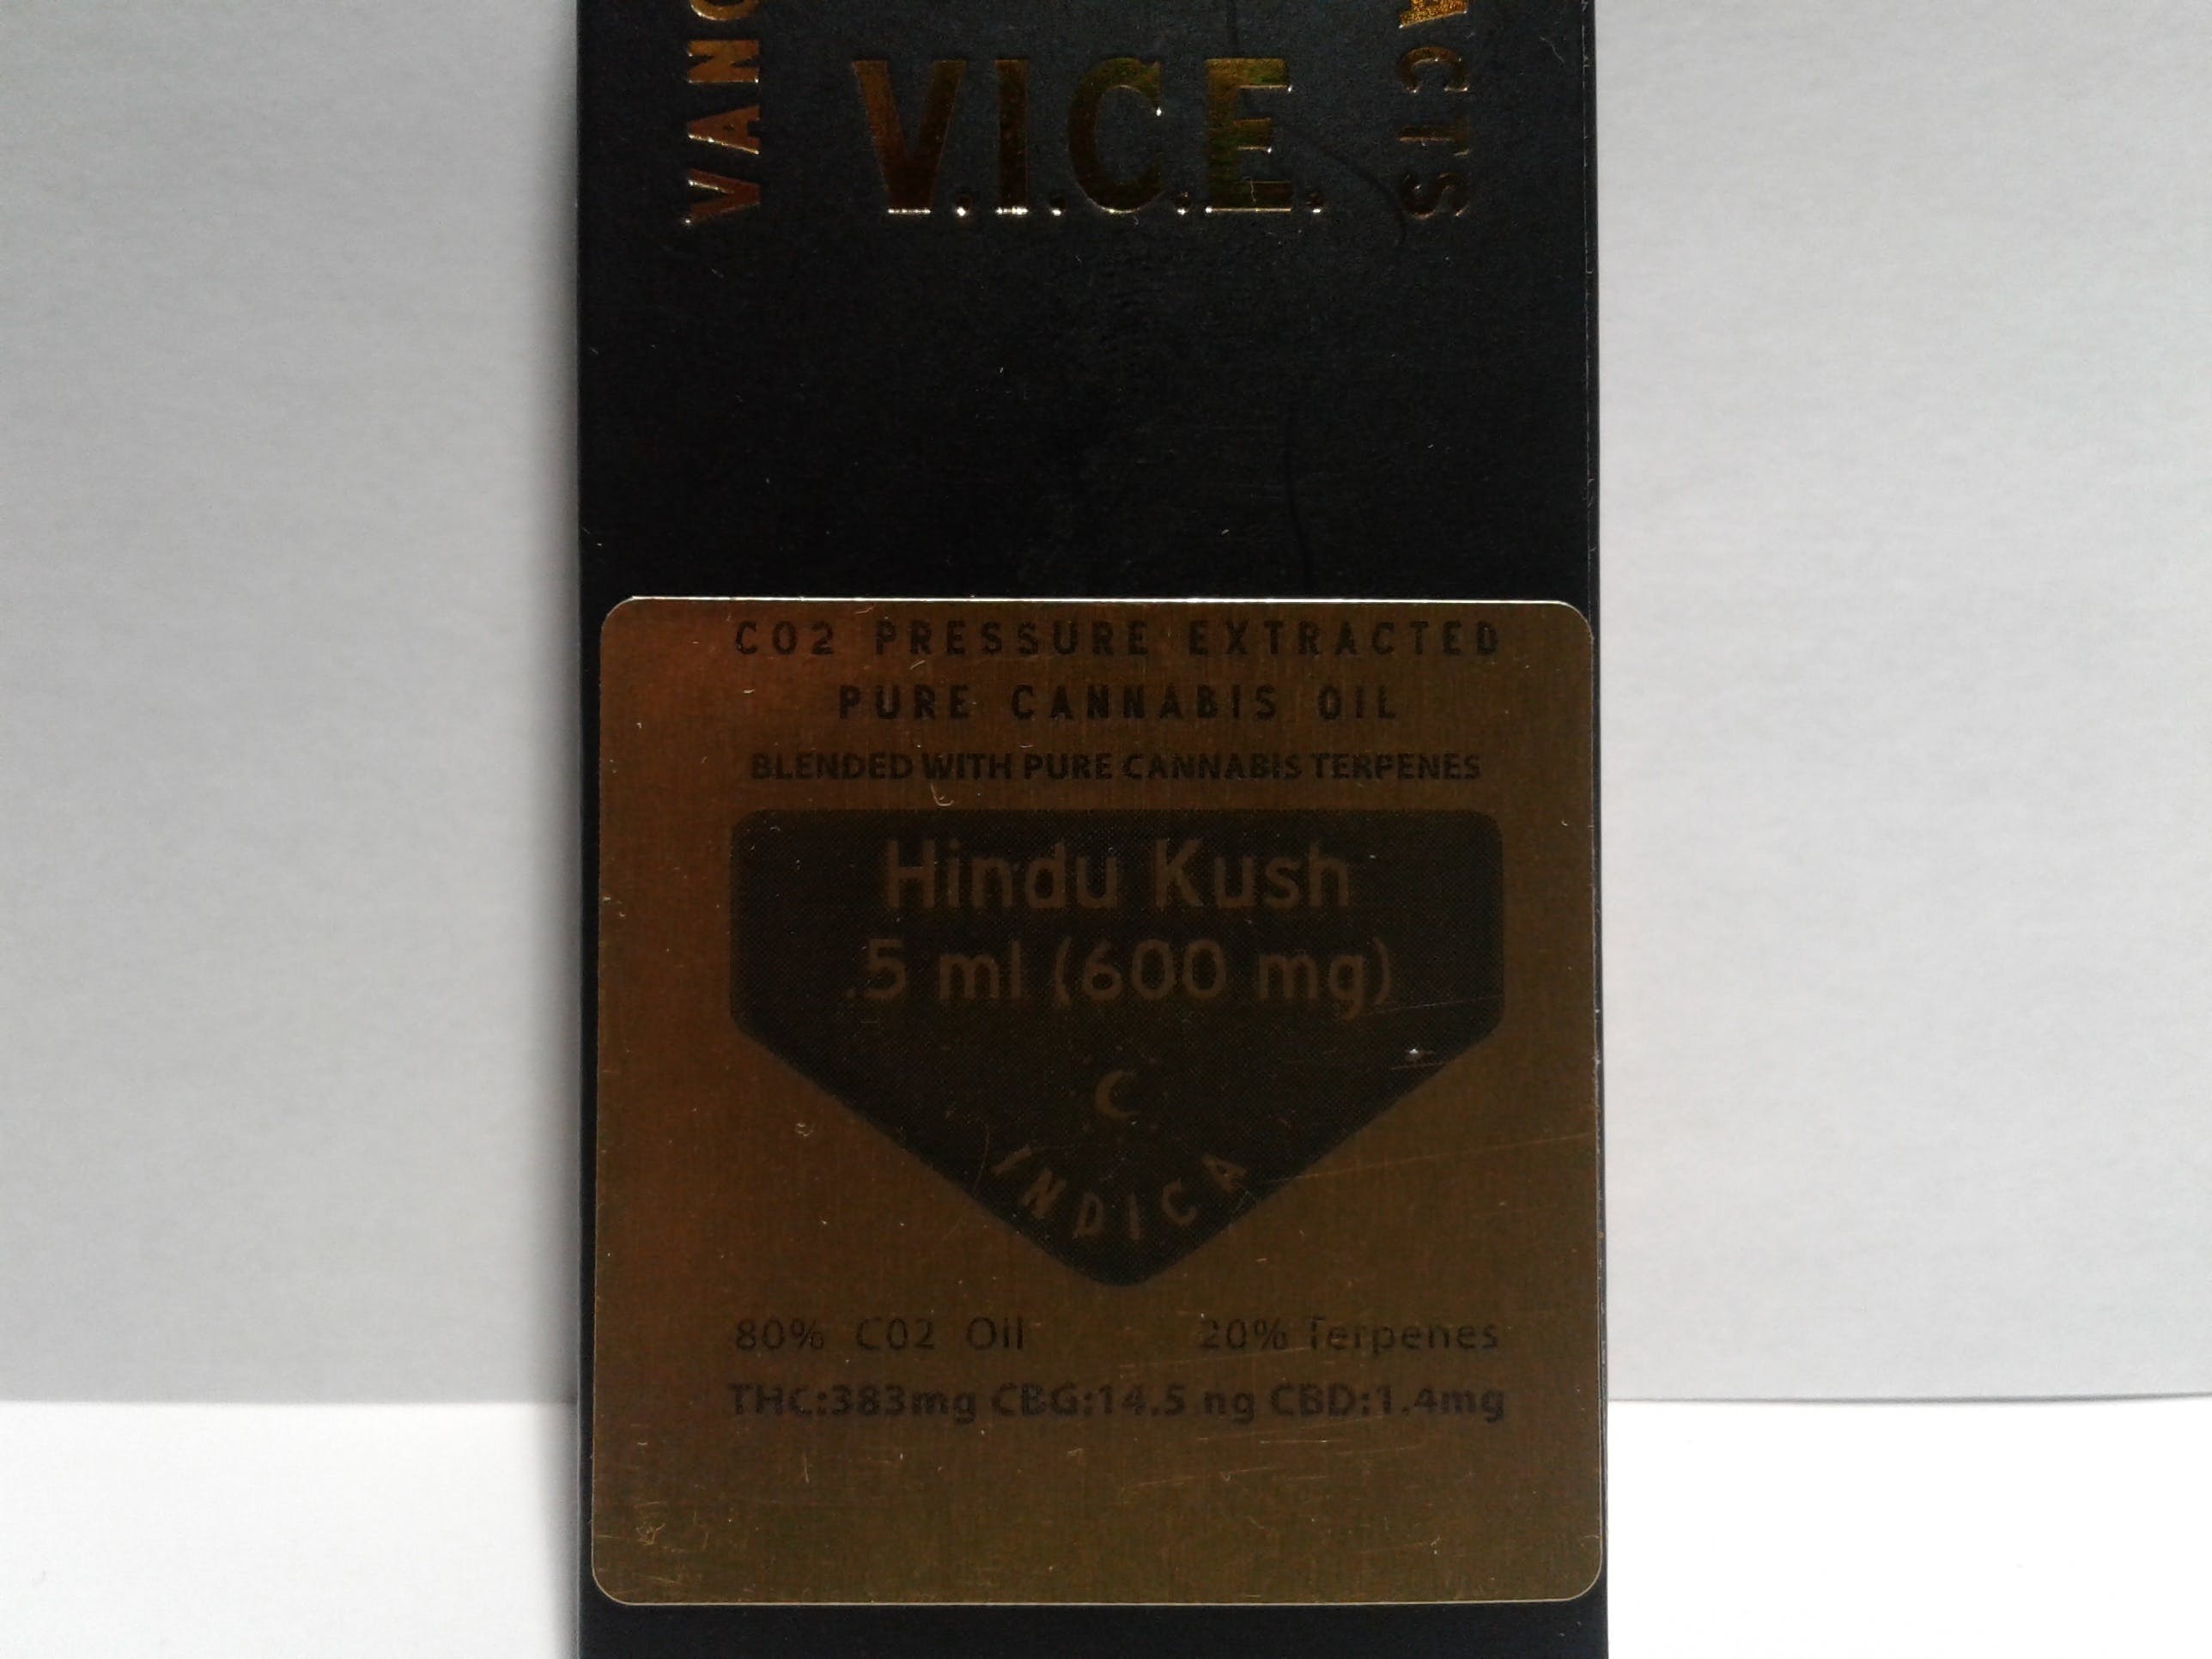 concentrate-hindu-kush-vancouver-island-cannabis-extracts